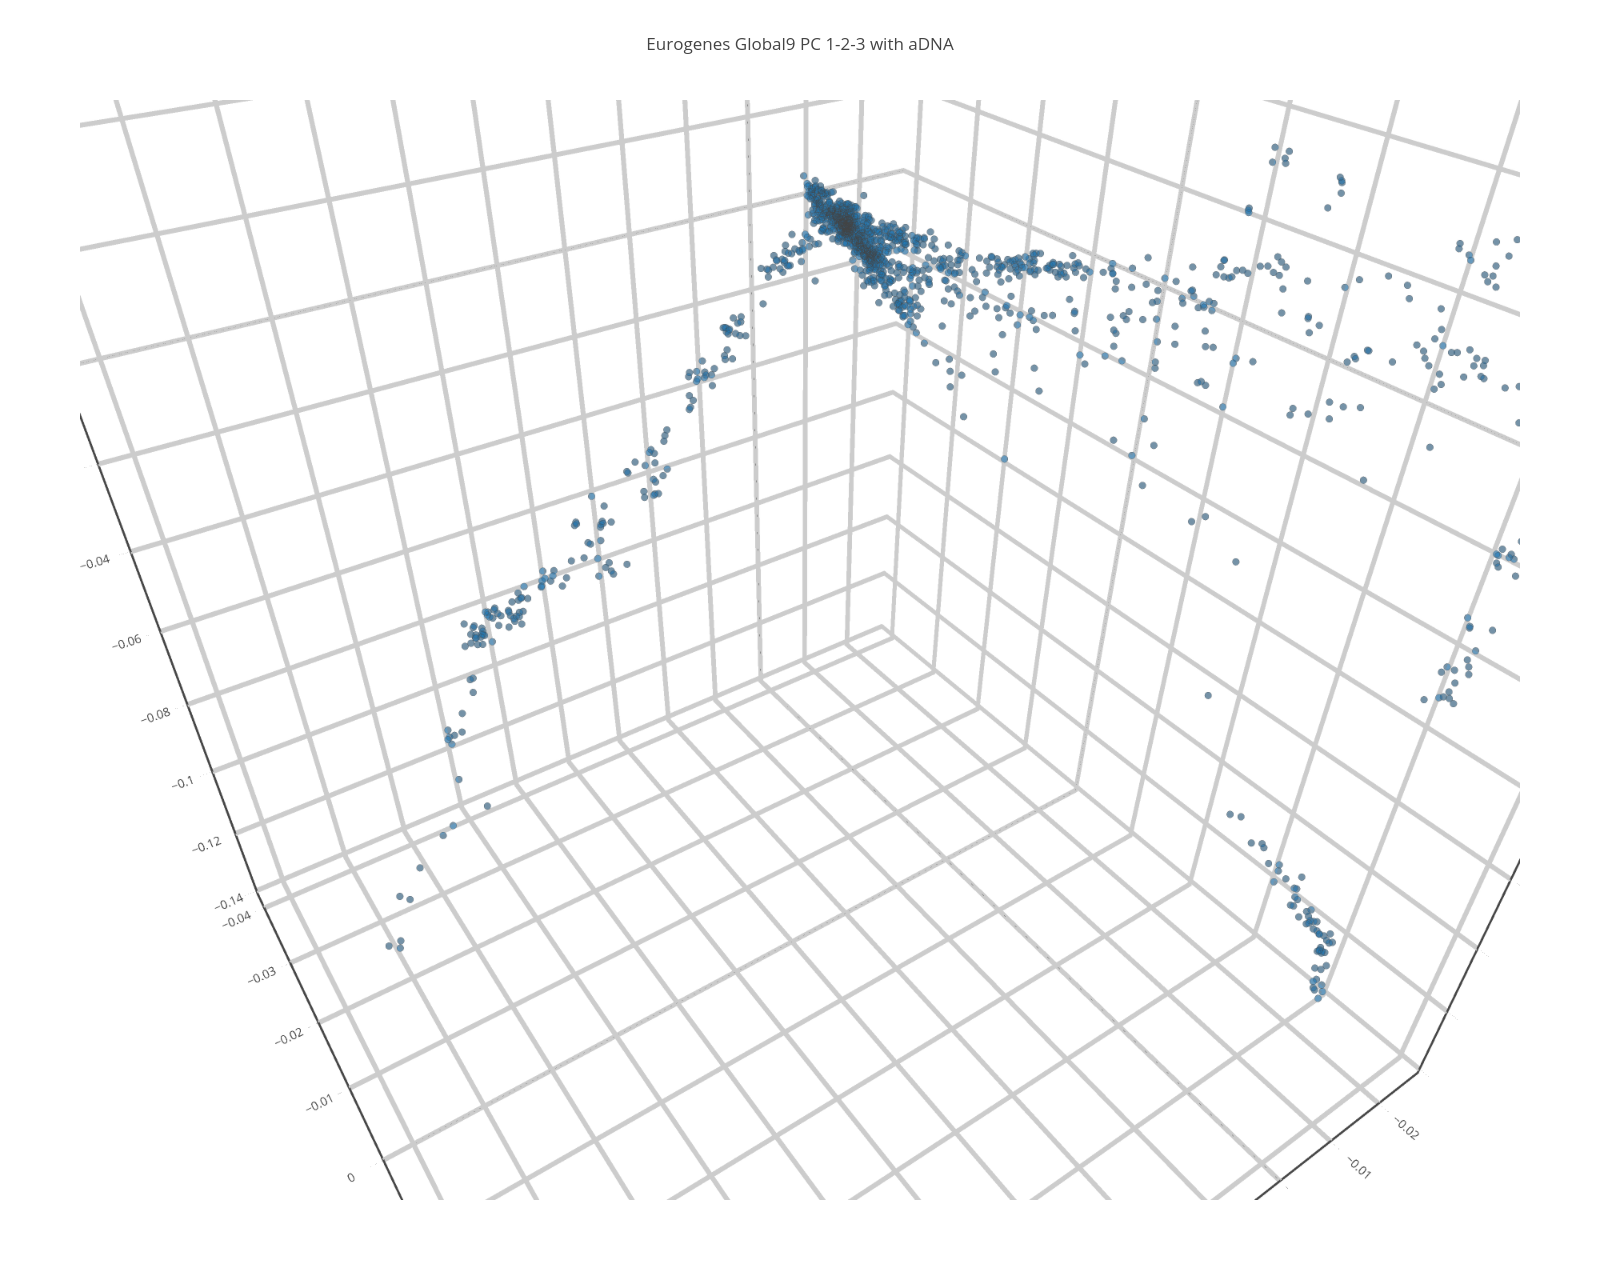 Eurogenes Global9 PC 1-2-3 with aDNA | scatter3d made by Open_genomes | plotly